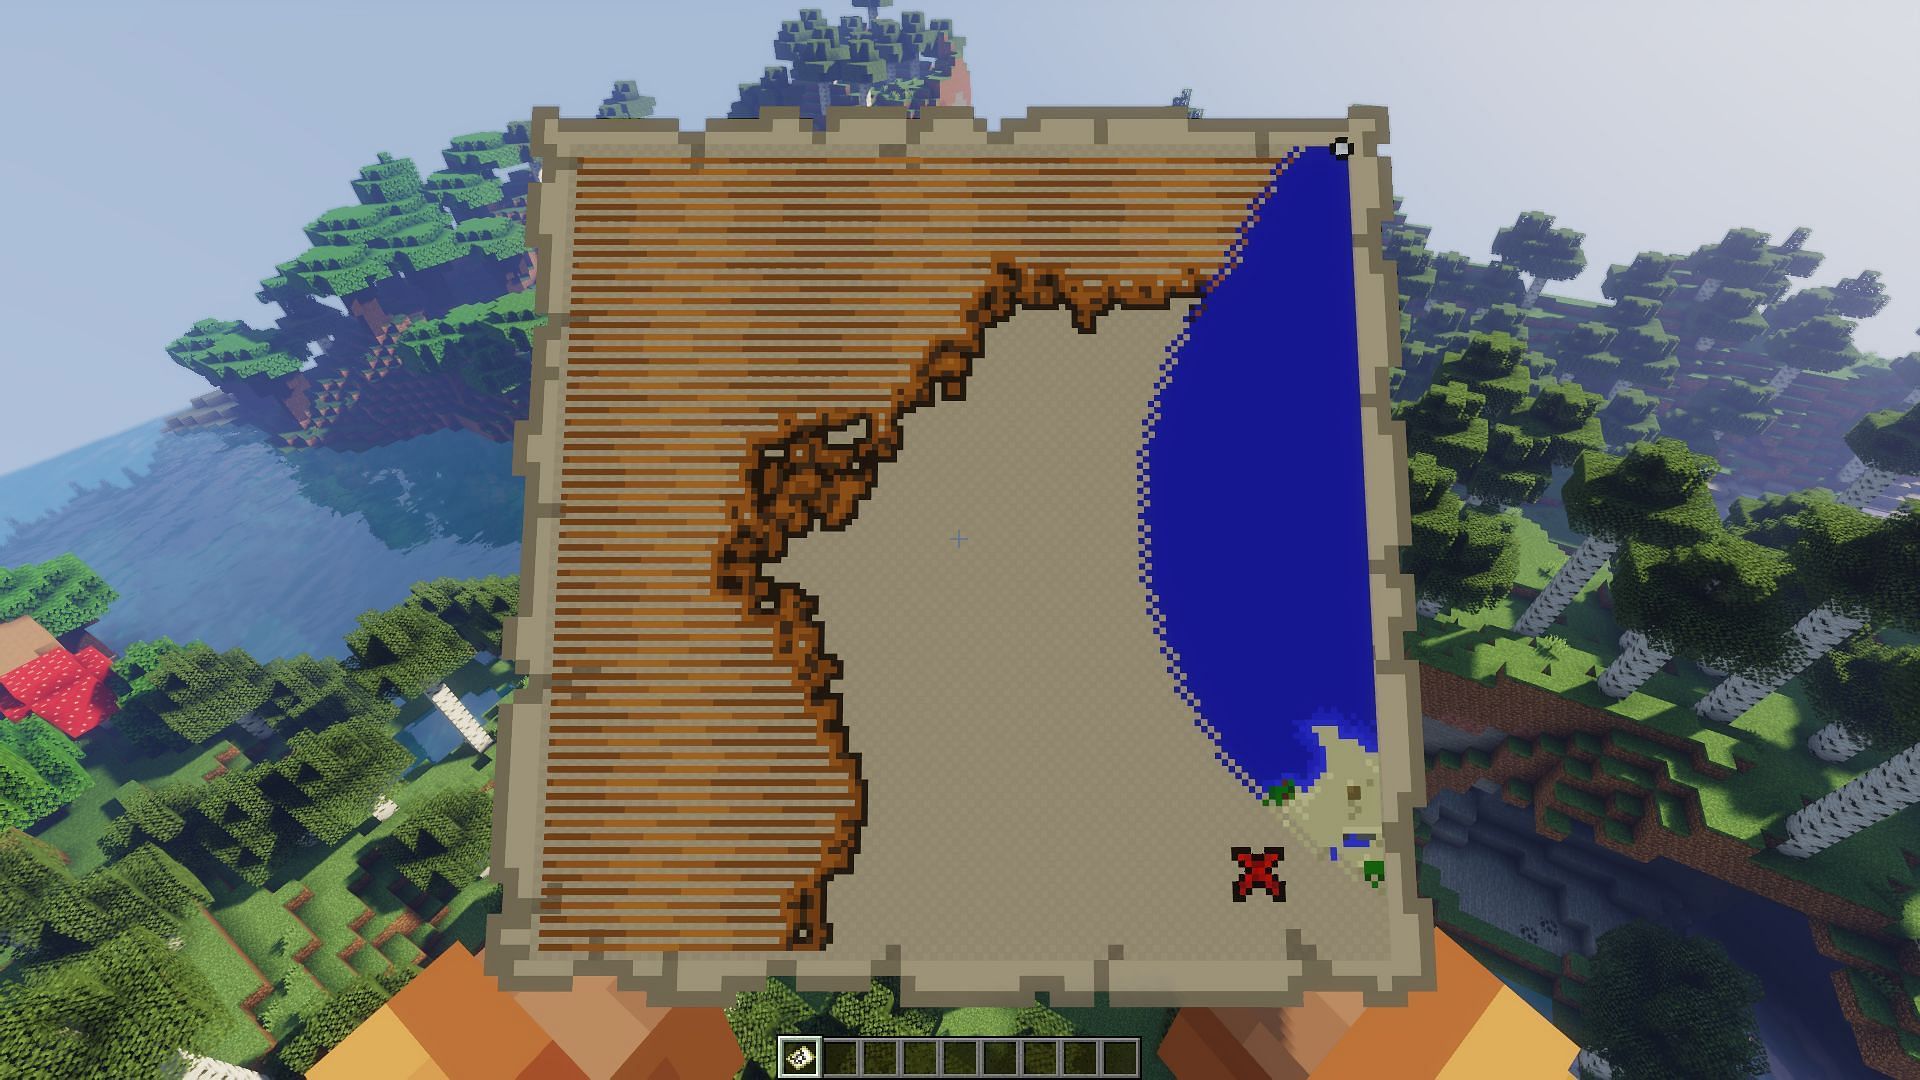 Player position point is tiny due to distance (Image via Minecraft)